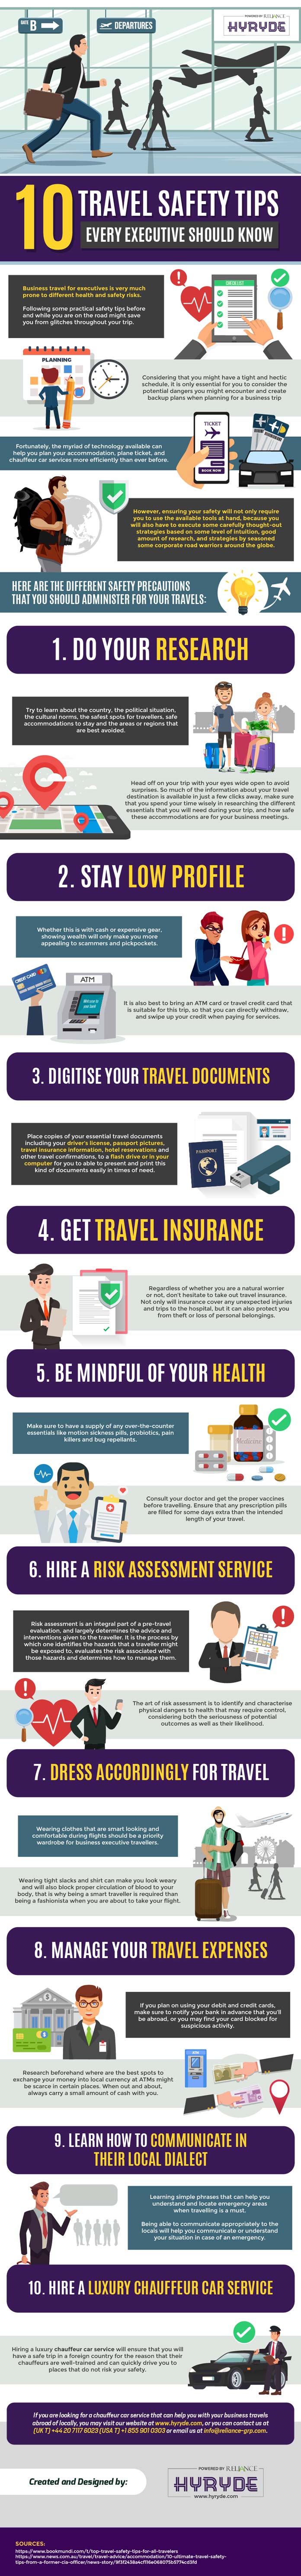 10 Travel safety tips every executive should know